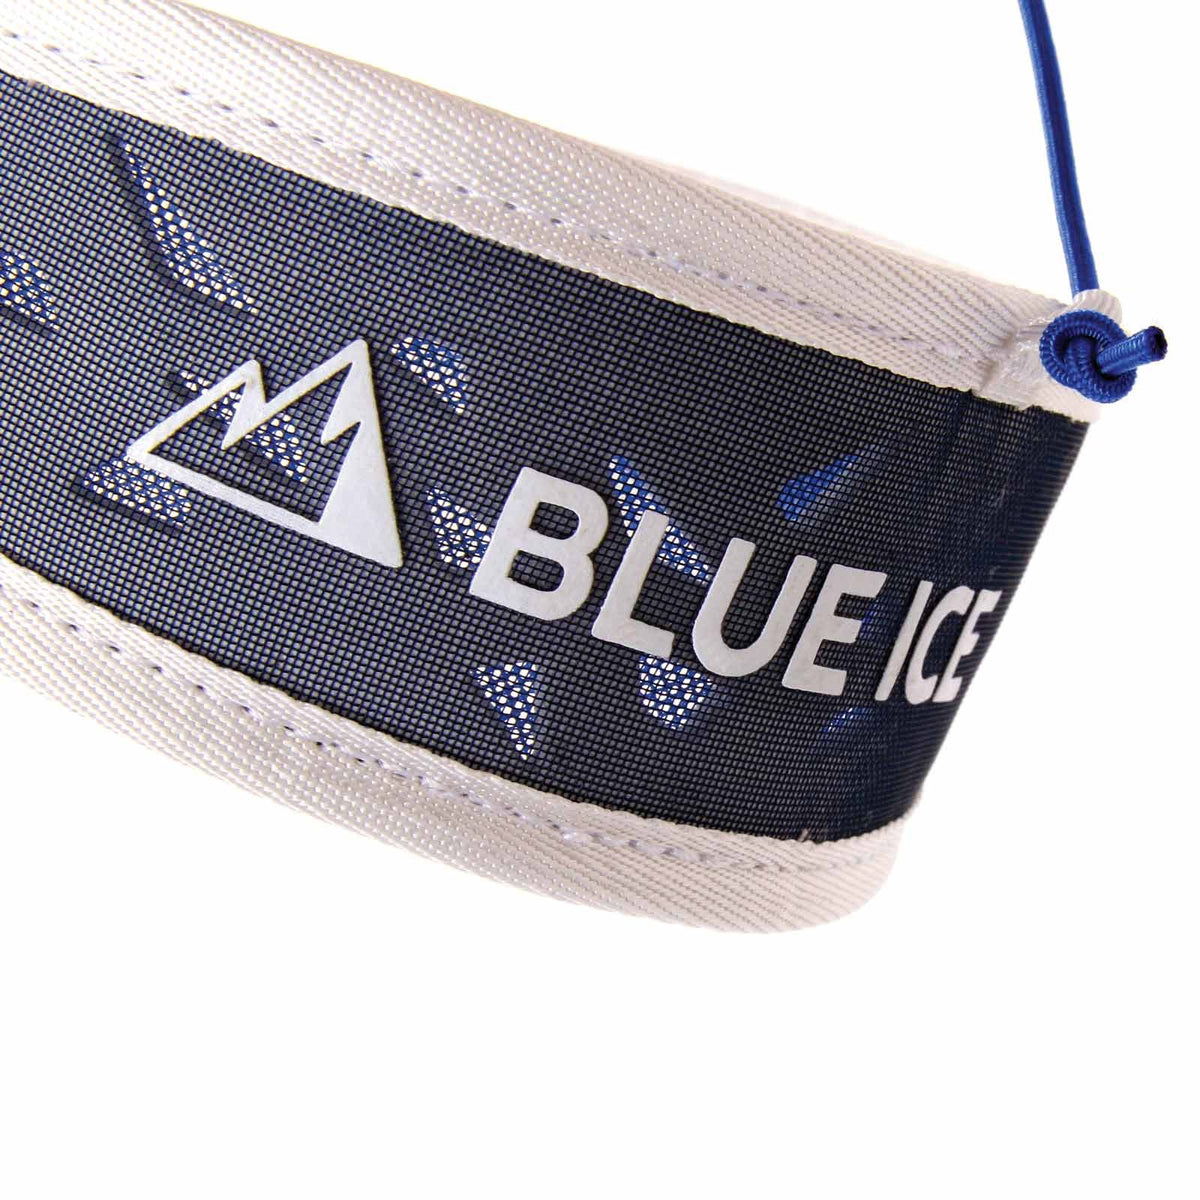 Blue Ice Addax Harness, close up of the logo